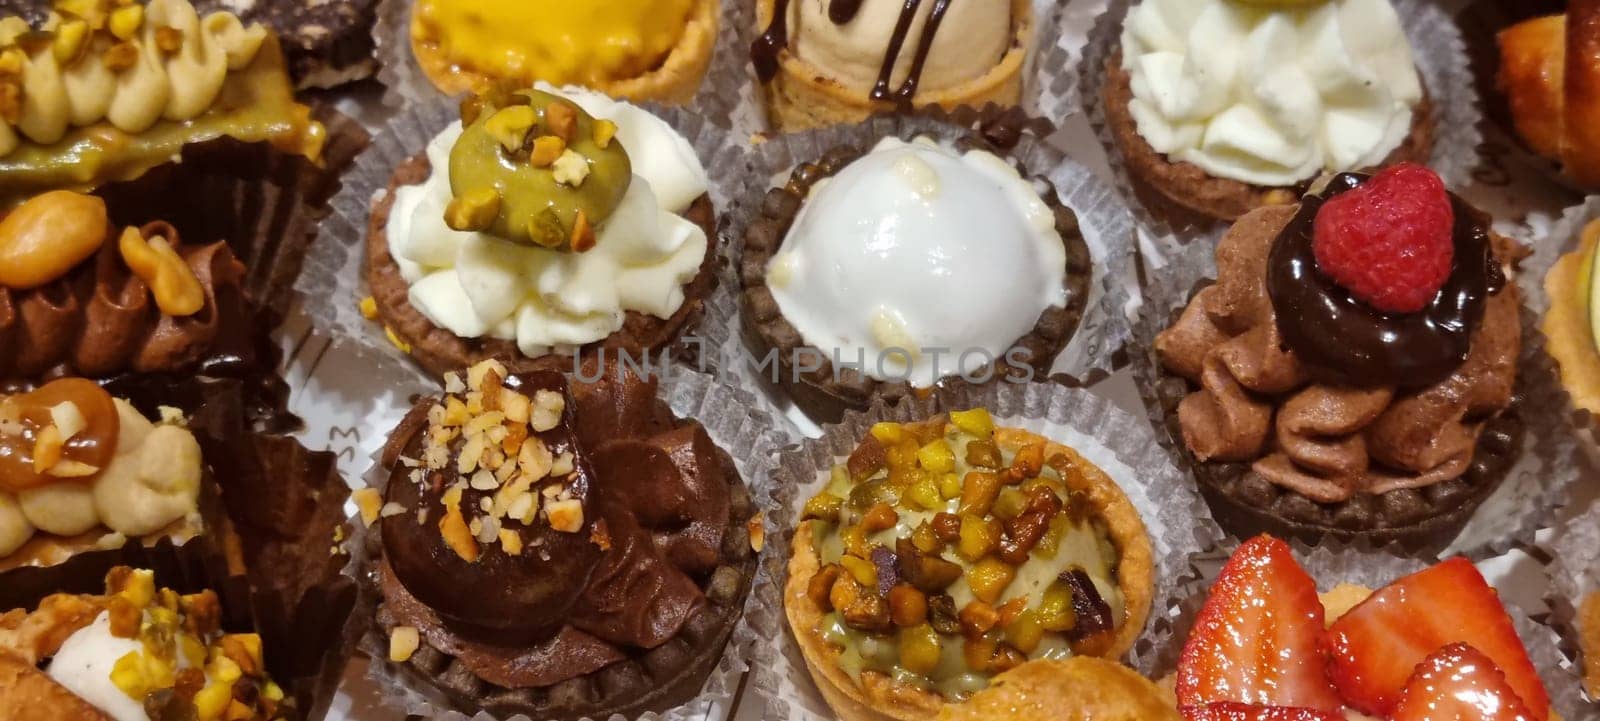 Close-up of a delectable selection of assorted bite-sized french pastries, featuring diverse toppings